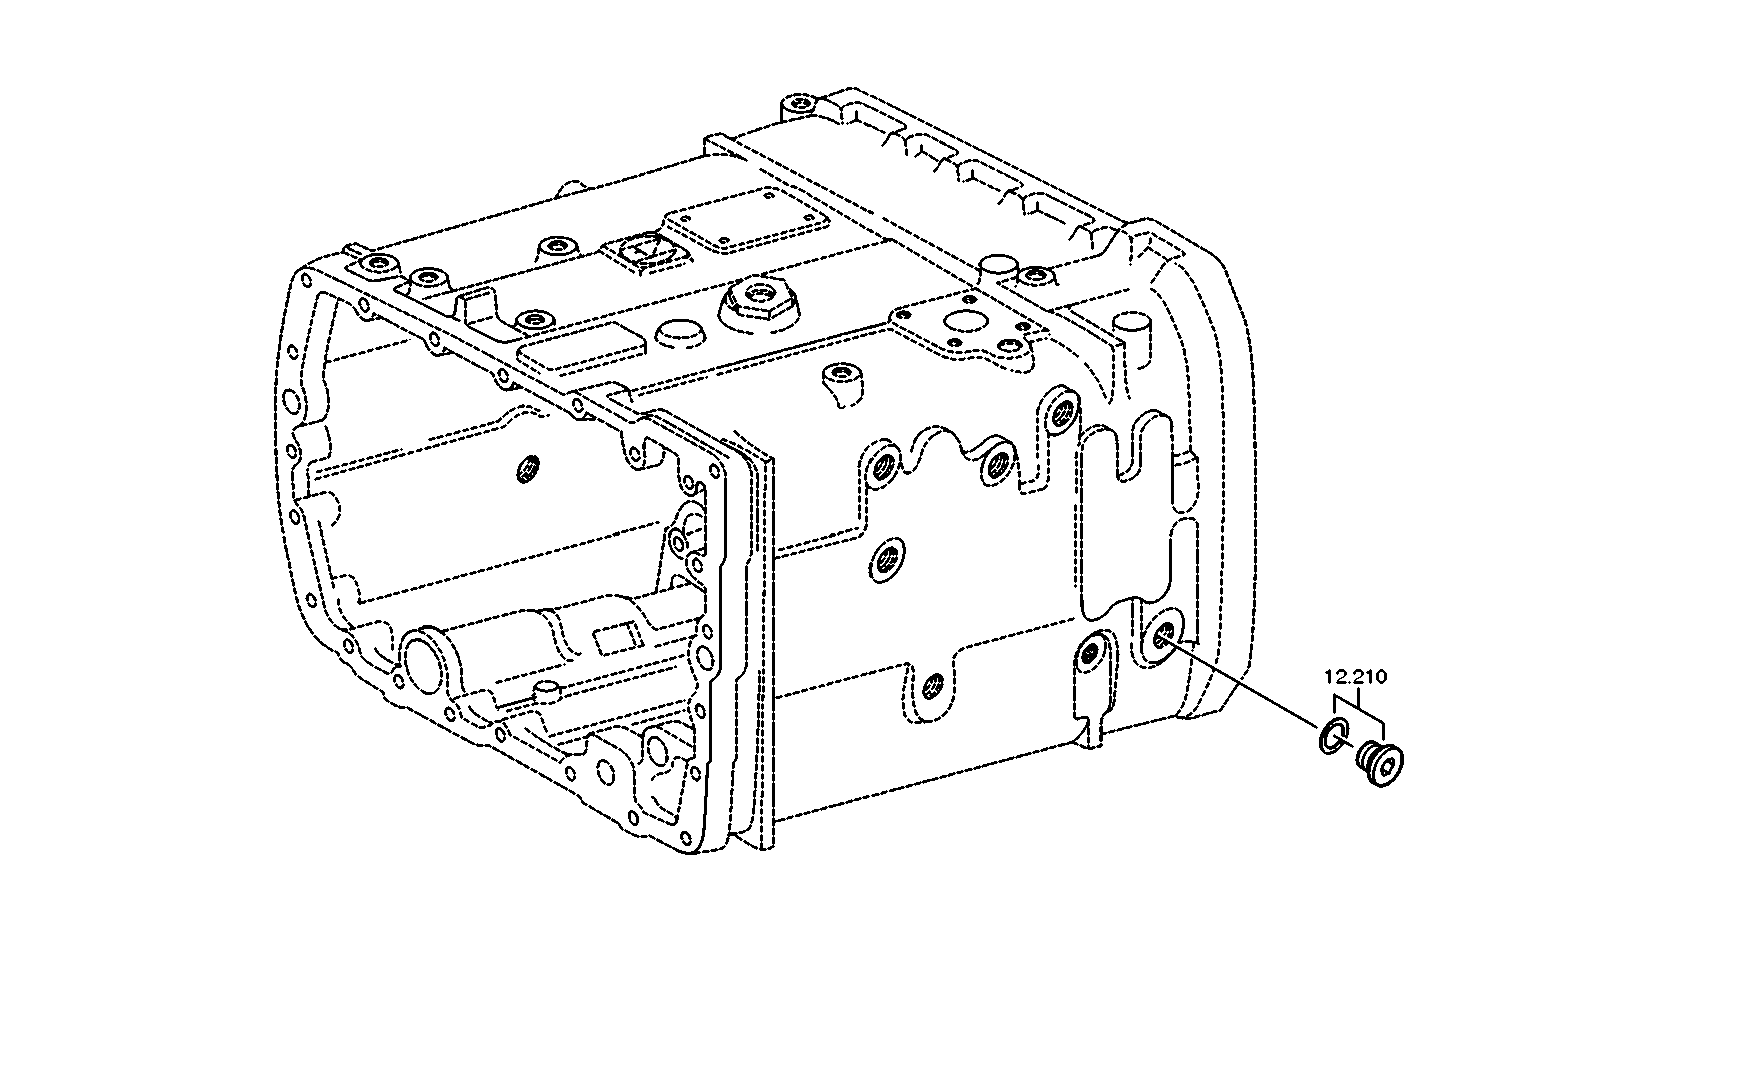 drawing for DAF 692684 - 5/2 WAY VALVE (figure 2)